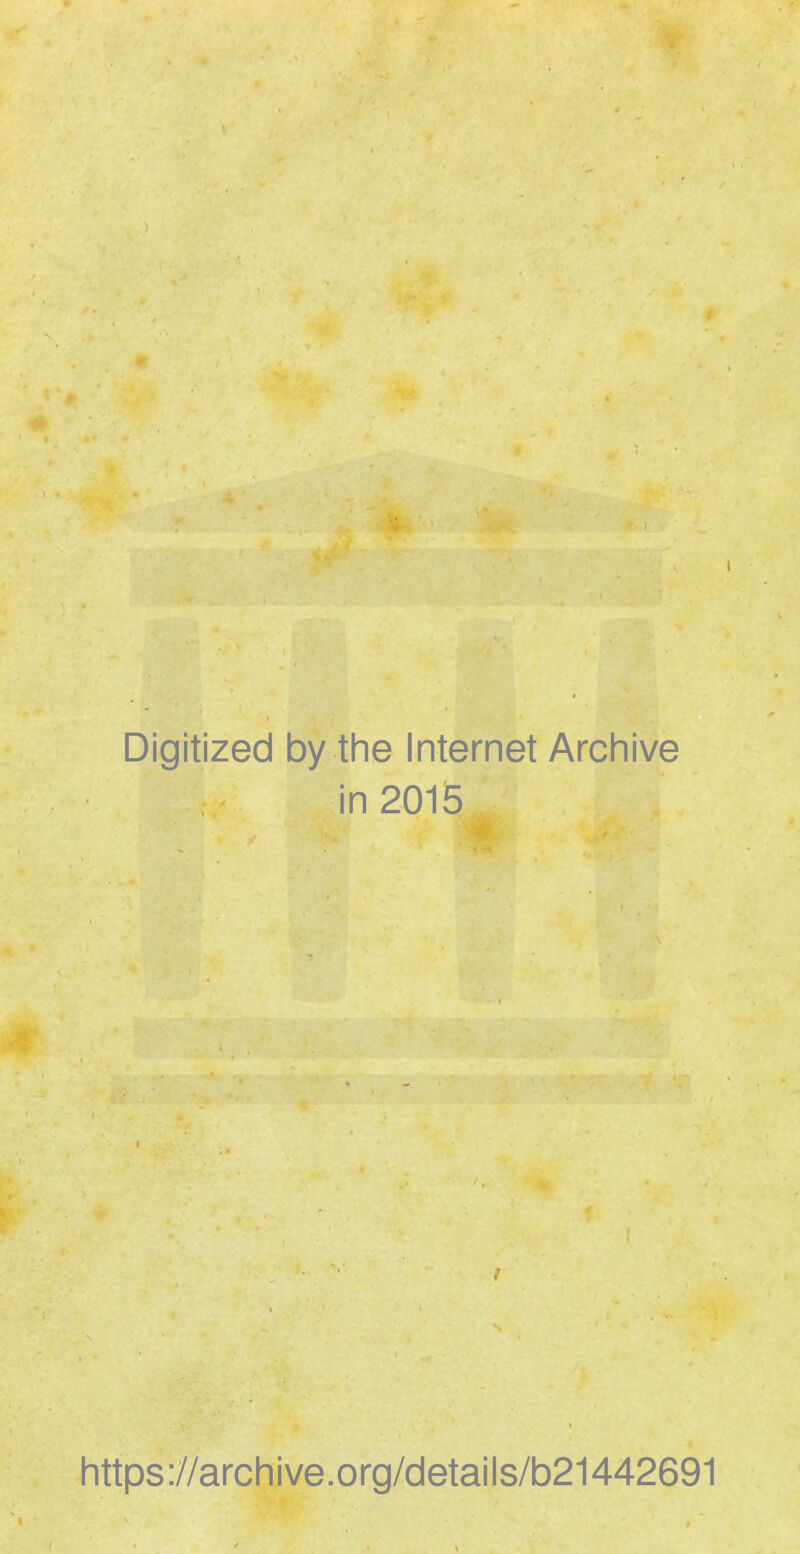 Digitized by the Internet Archive in 2015 https://archive.org/details/b21442691